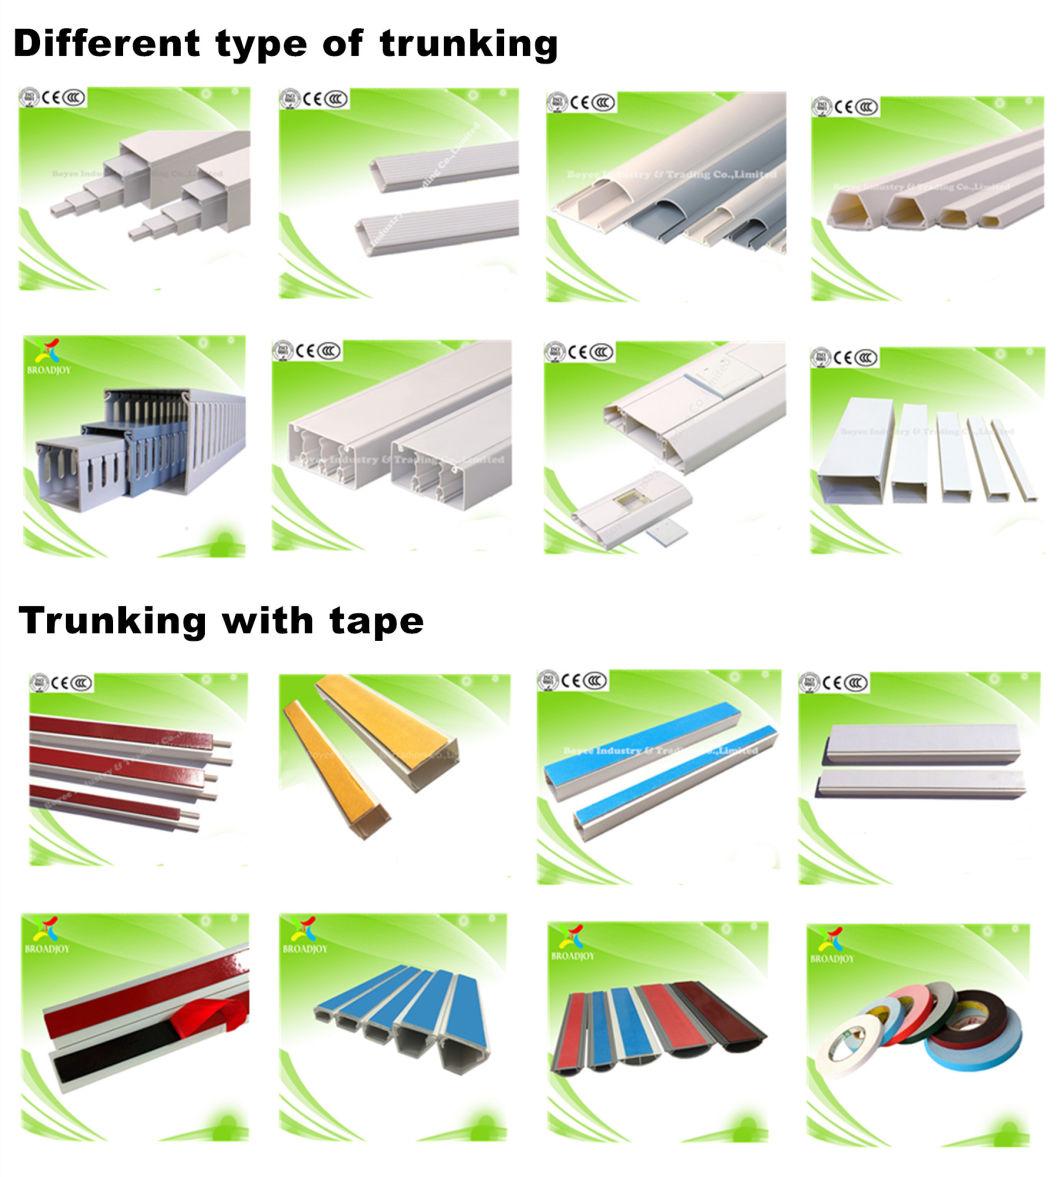 PVC Trunking with Blue Tape / Electrical Cable Trunking